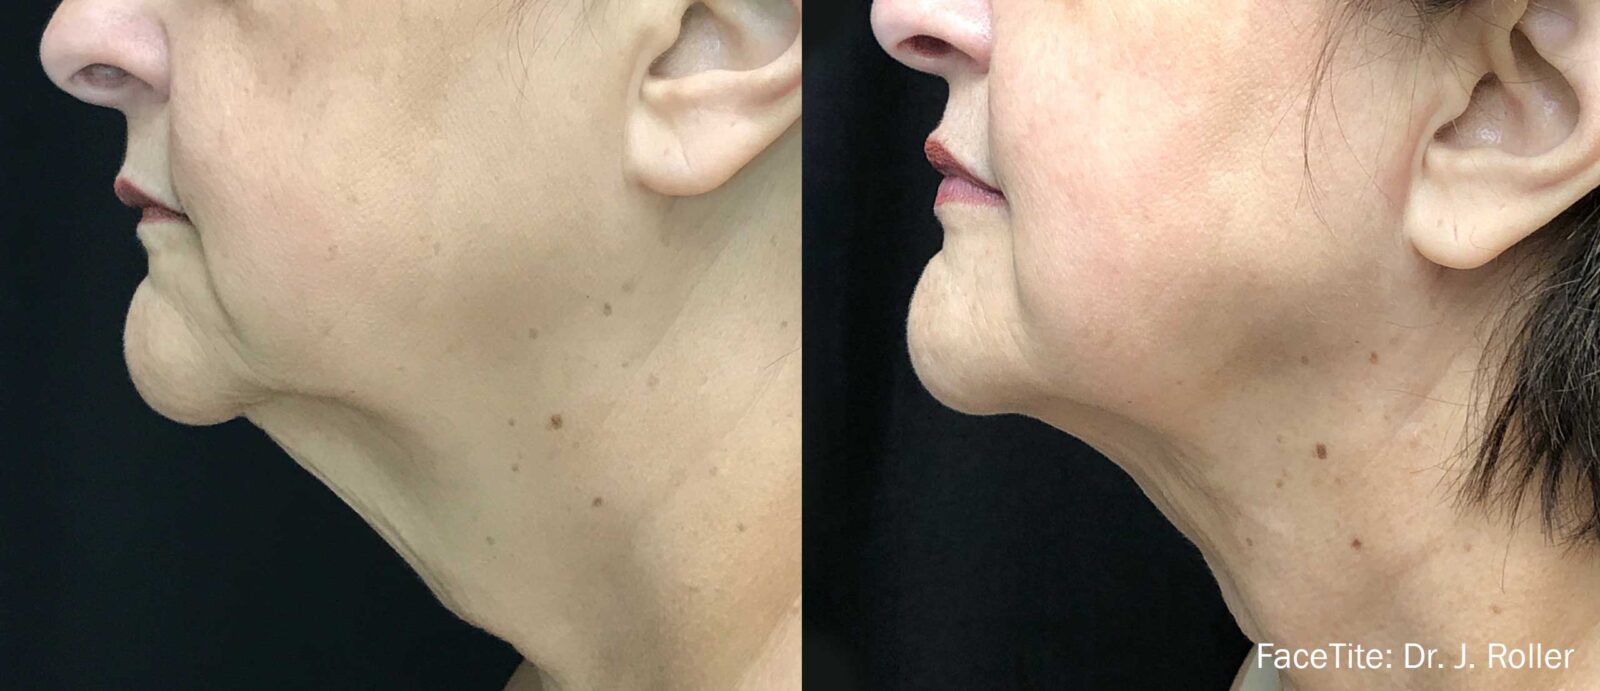 Before and after FaceTite - Image Courtesy of Inmode Provider Network -